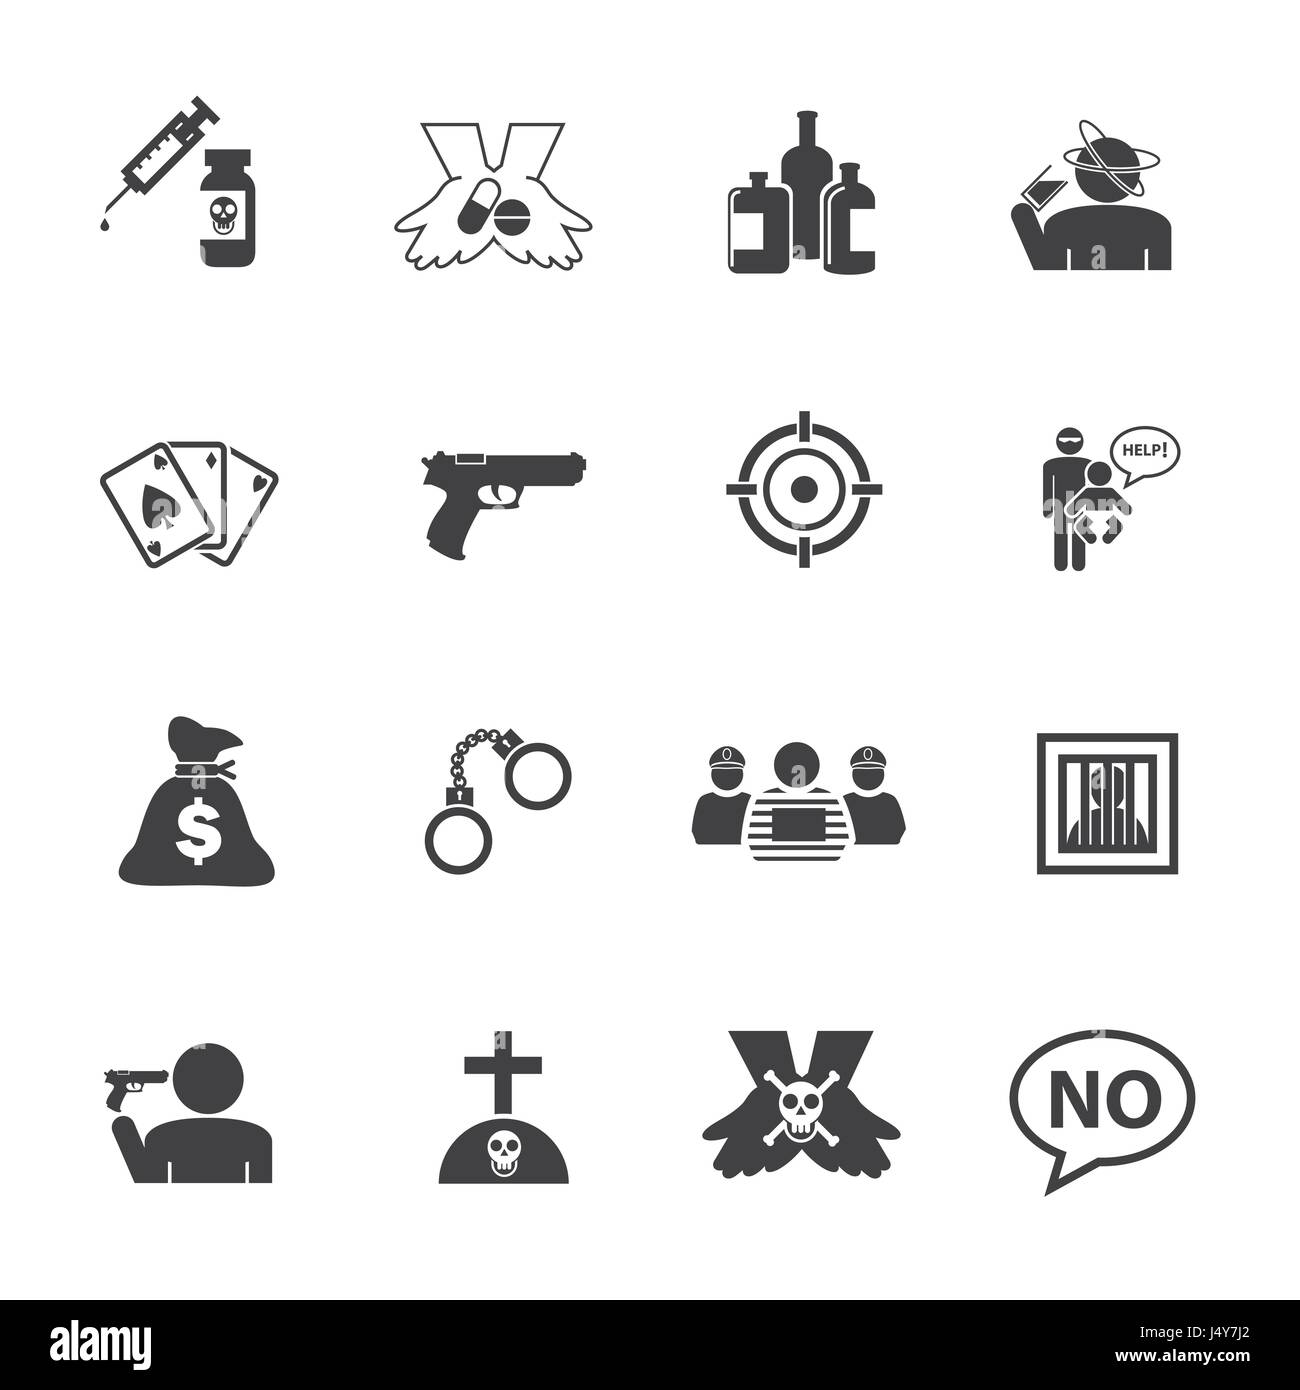 Simple Drug and Crime Icons set. Vector flat design. Stock Vector